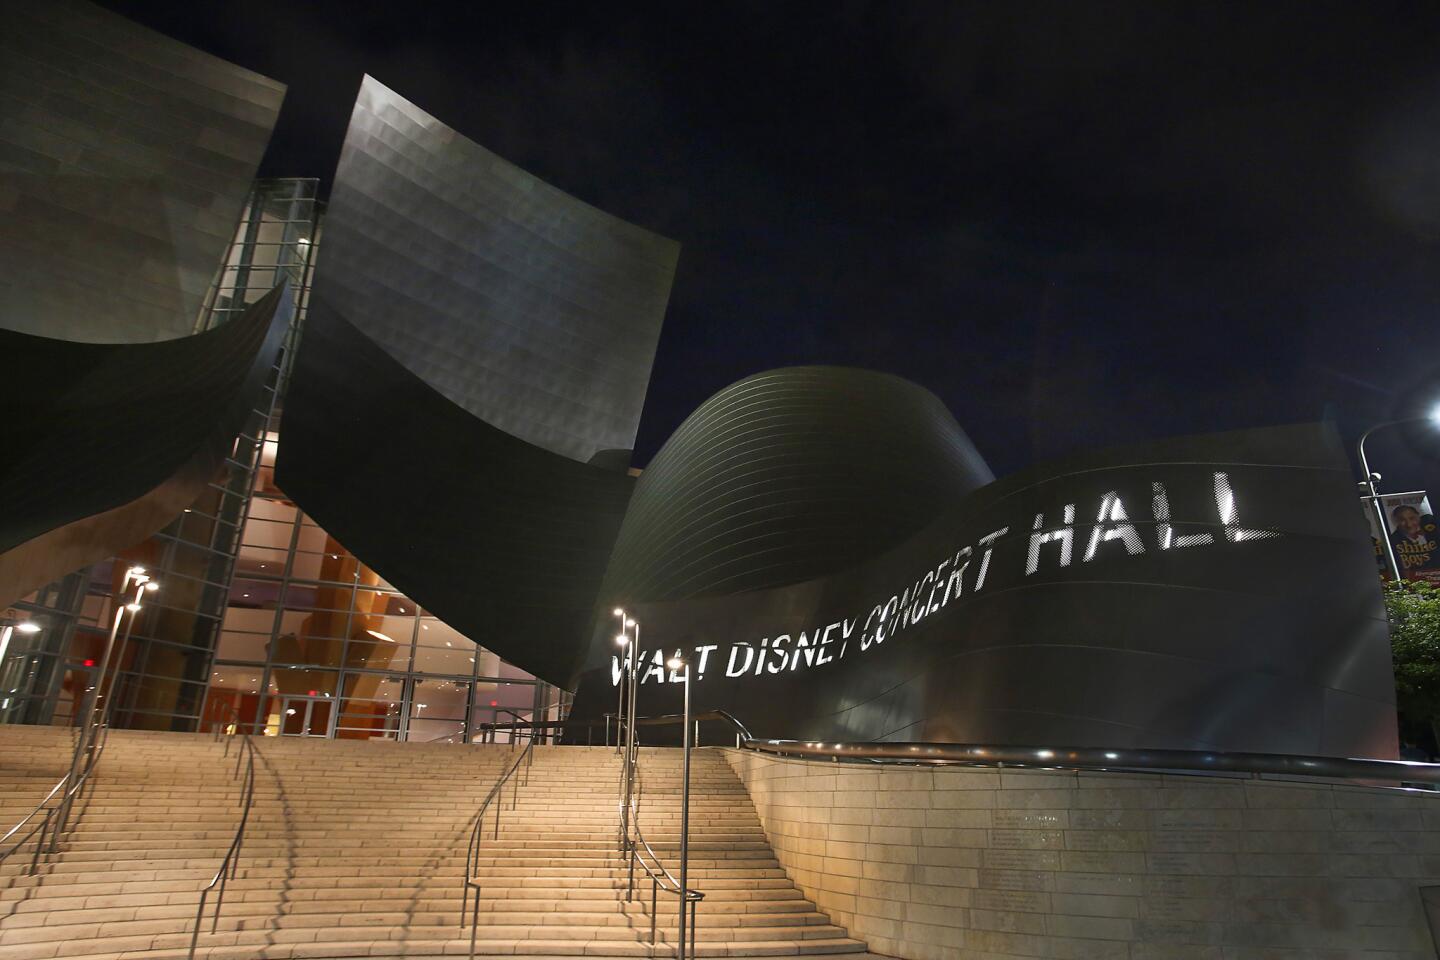 Although it is now celebrating its 10th anniversary, Walt Disney Concert Hall has been in operation during 11 calendar years, and in each one history has been made. Here are examples from each Disney year of how the hall has mattered not only to L.A. but also to the art of music.